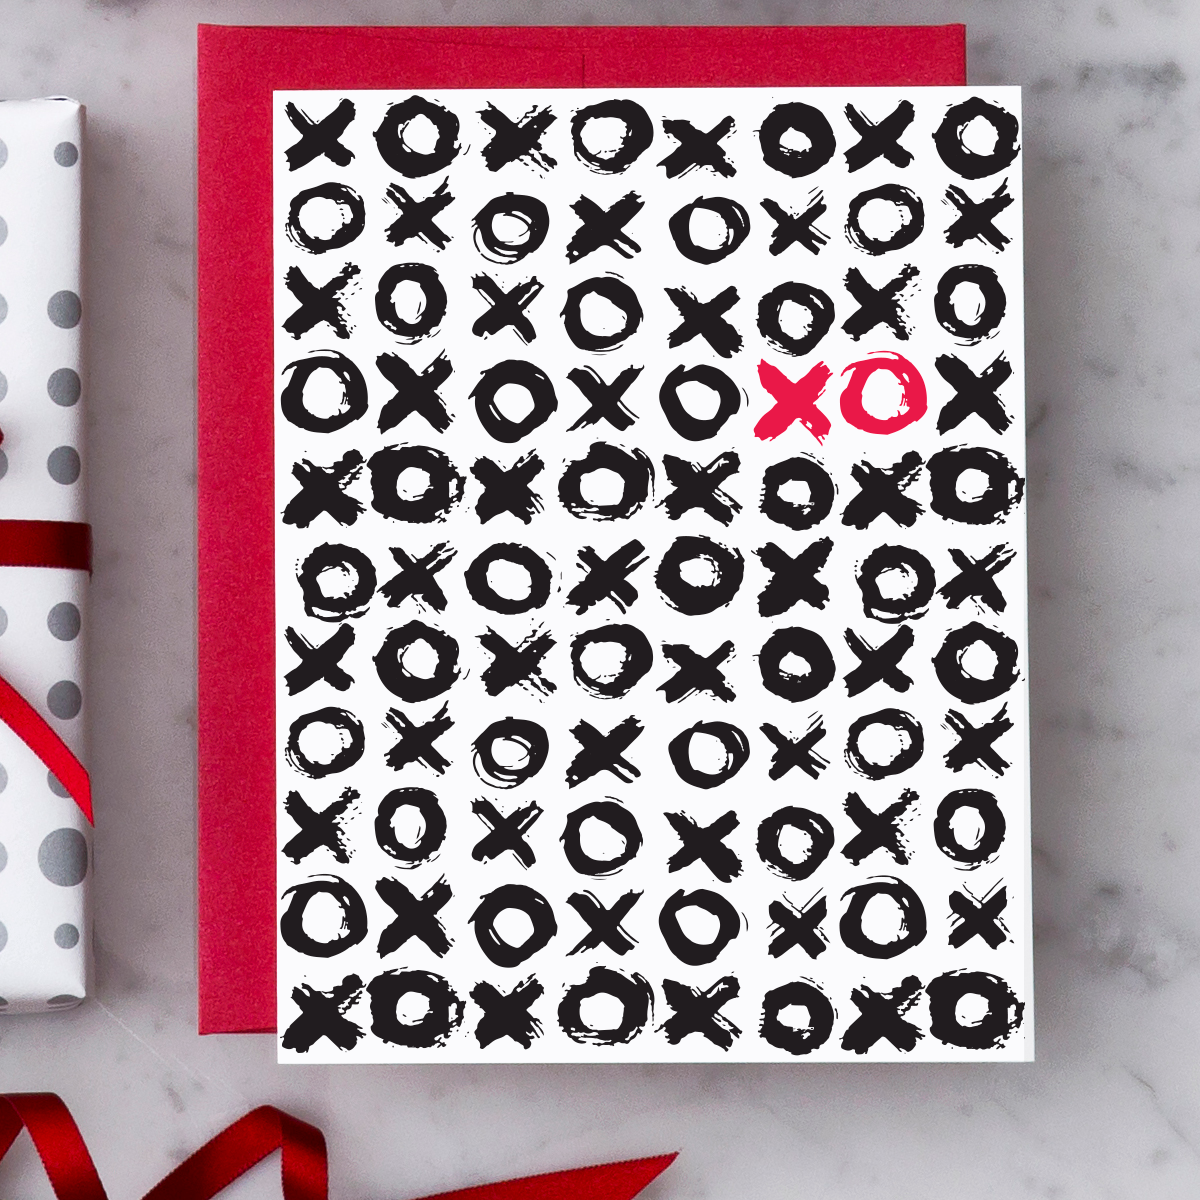 Design With Heart "XOXO" Valentine's Day Card